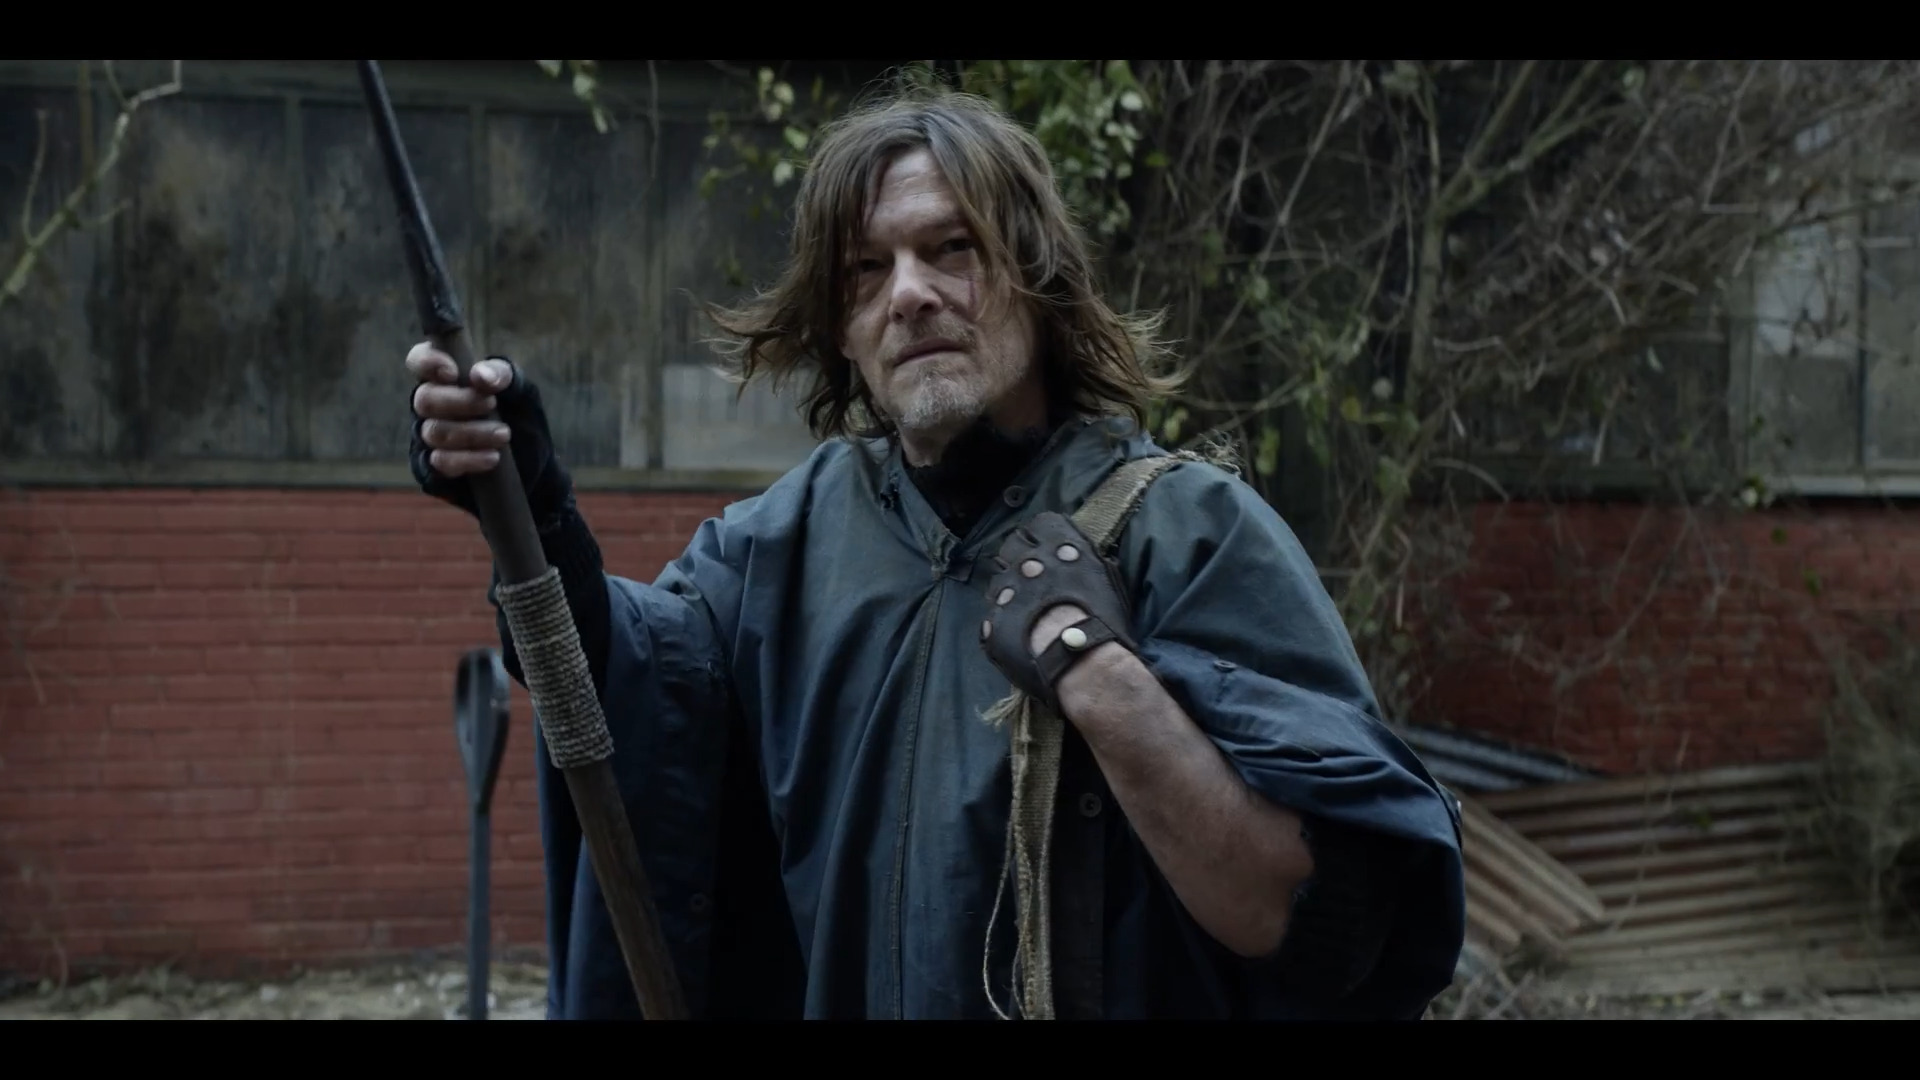 The Walking Dead: Daryl Dixon Official Trailer 